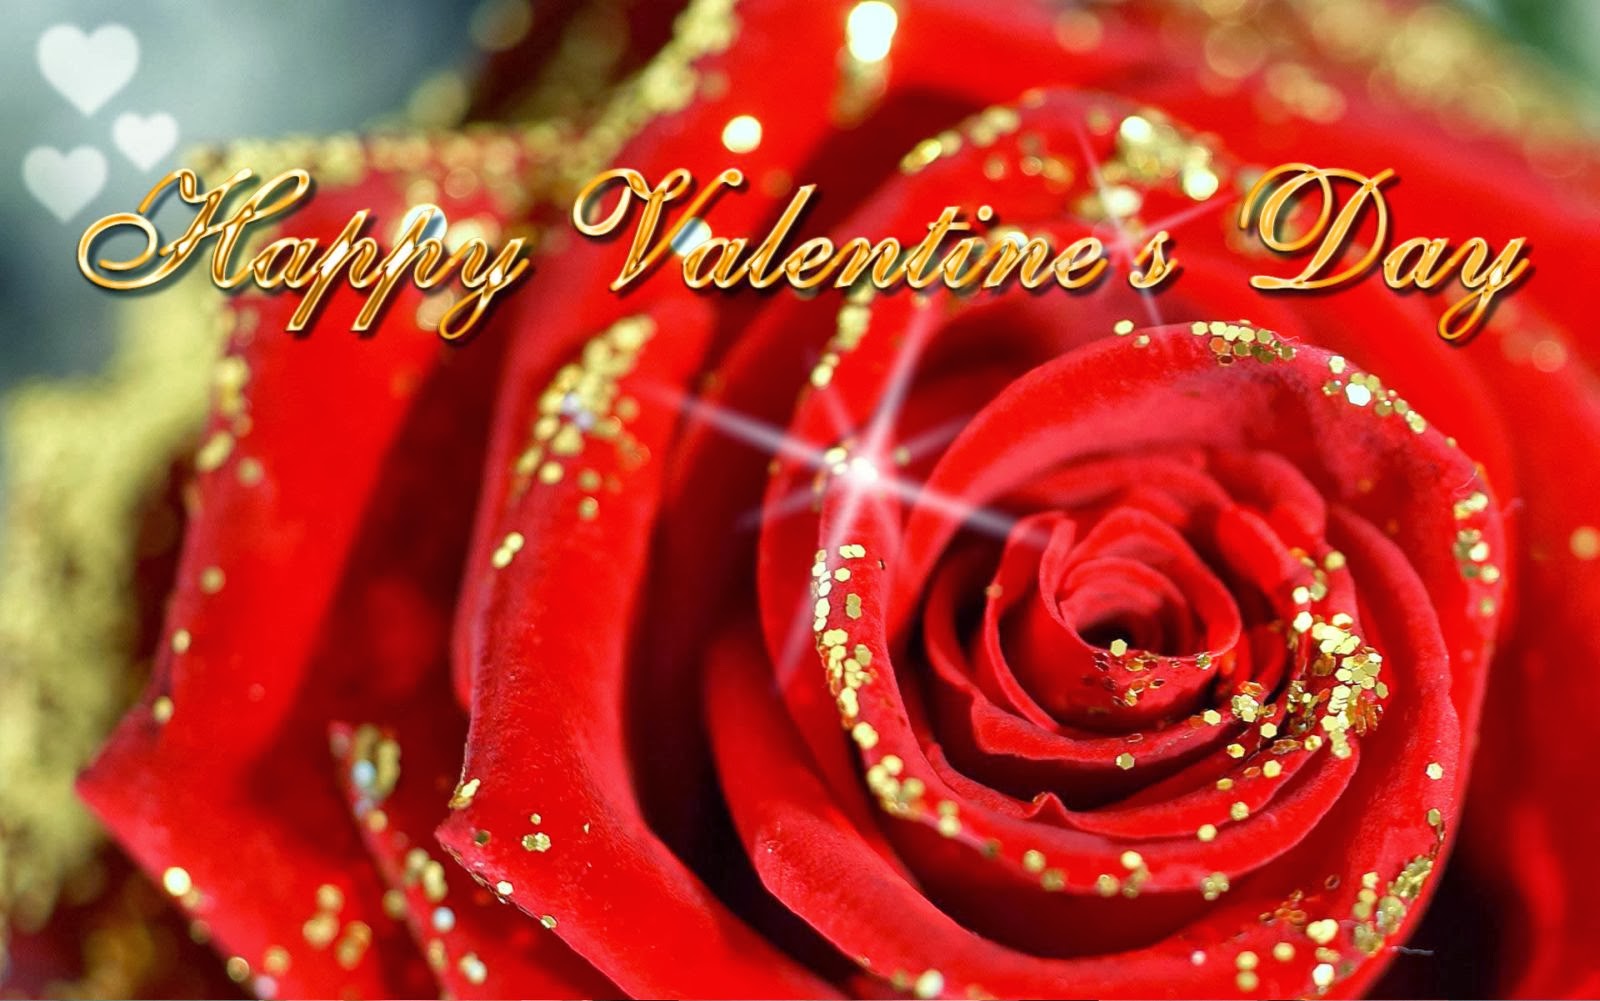  Wallpapers and Images Valentine day wallpaper free downloads